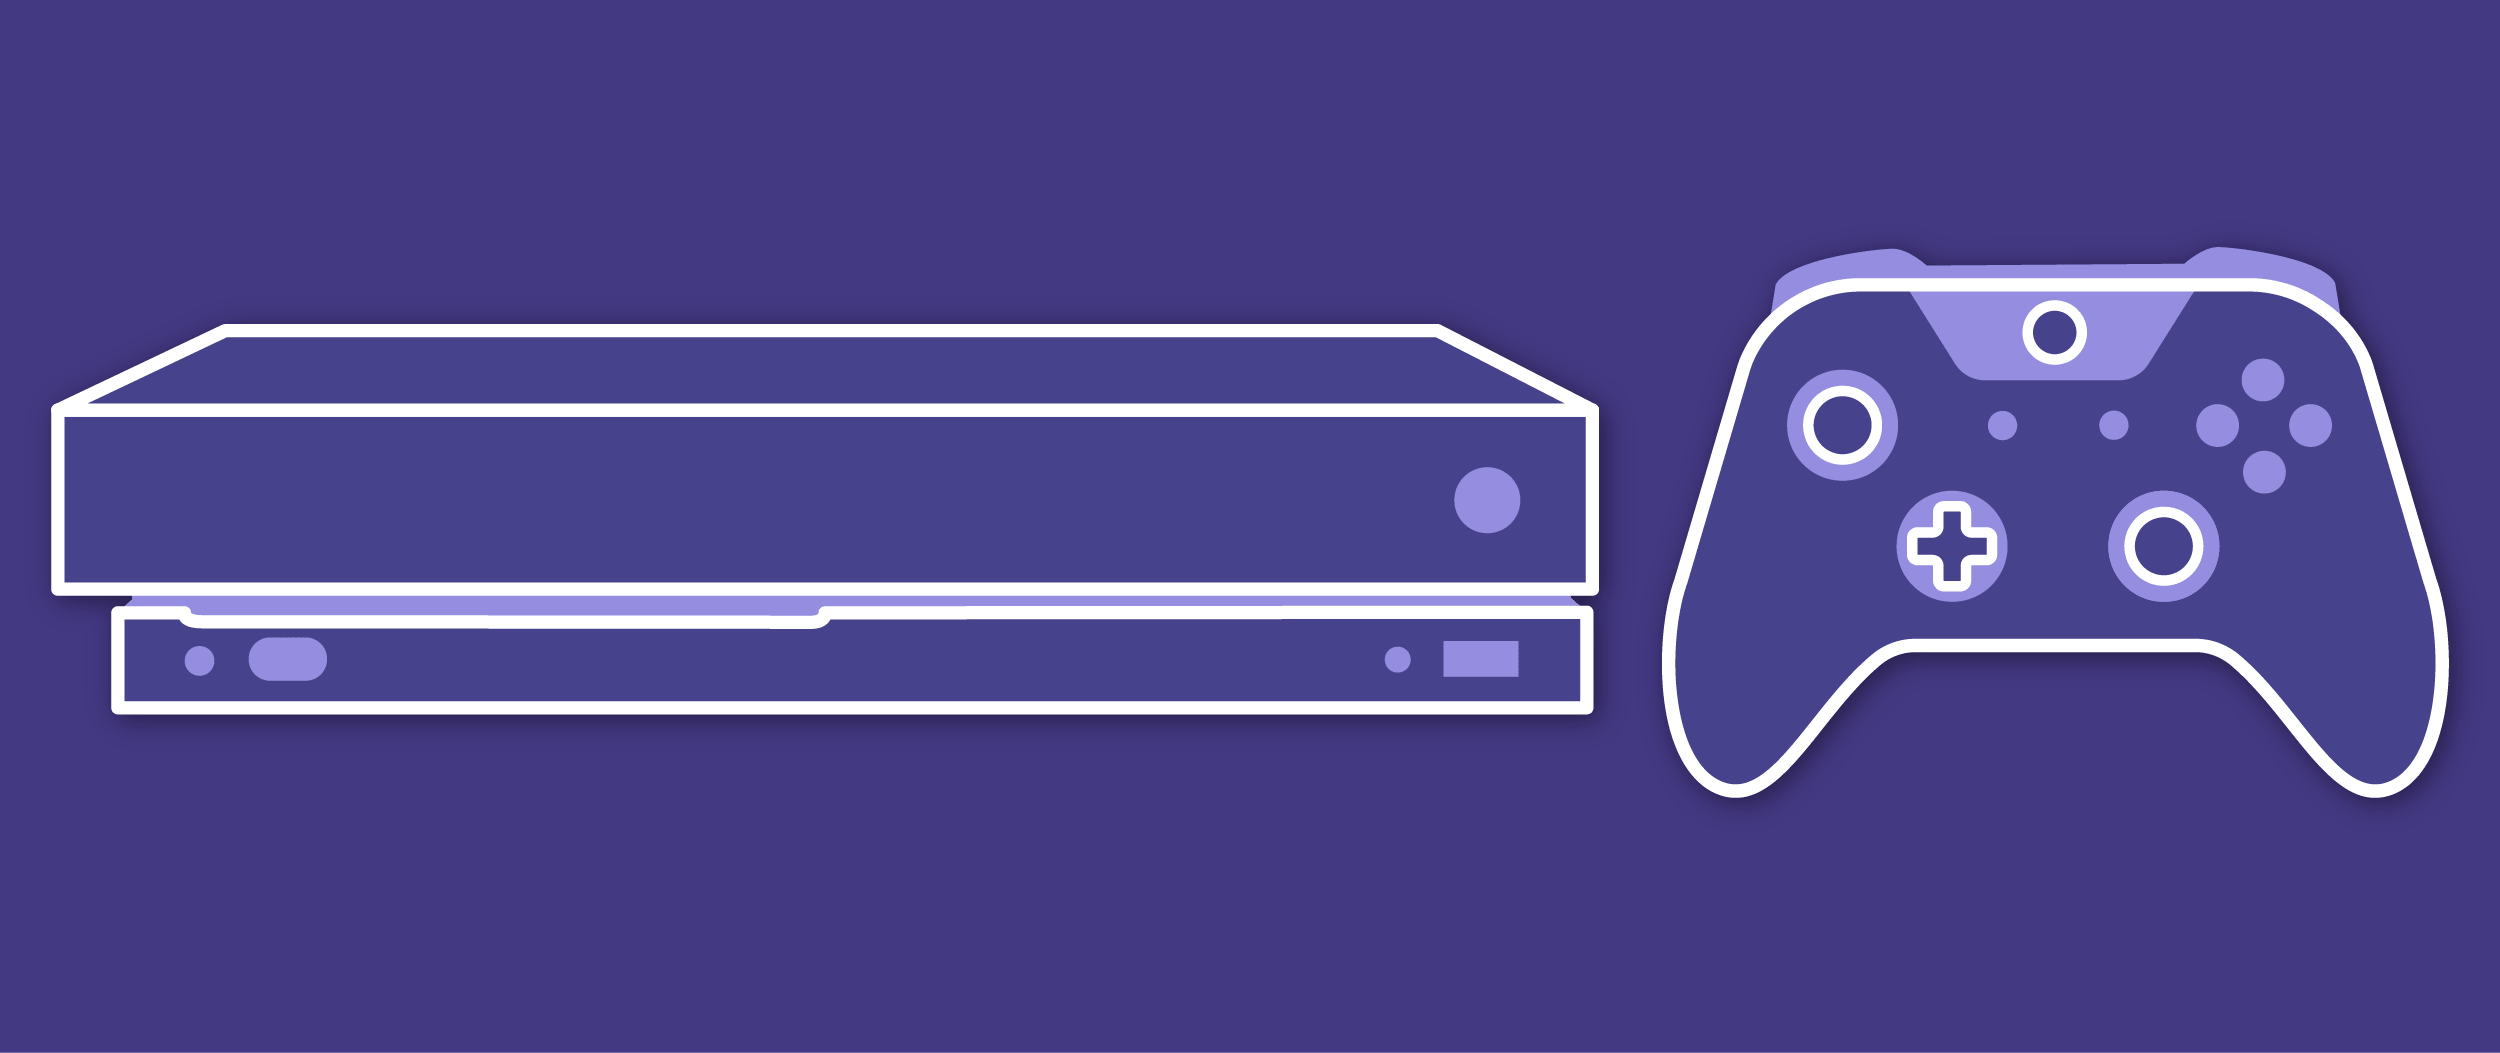 Drawn Graphic of an Xbox One and a controller